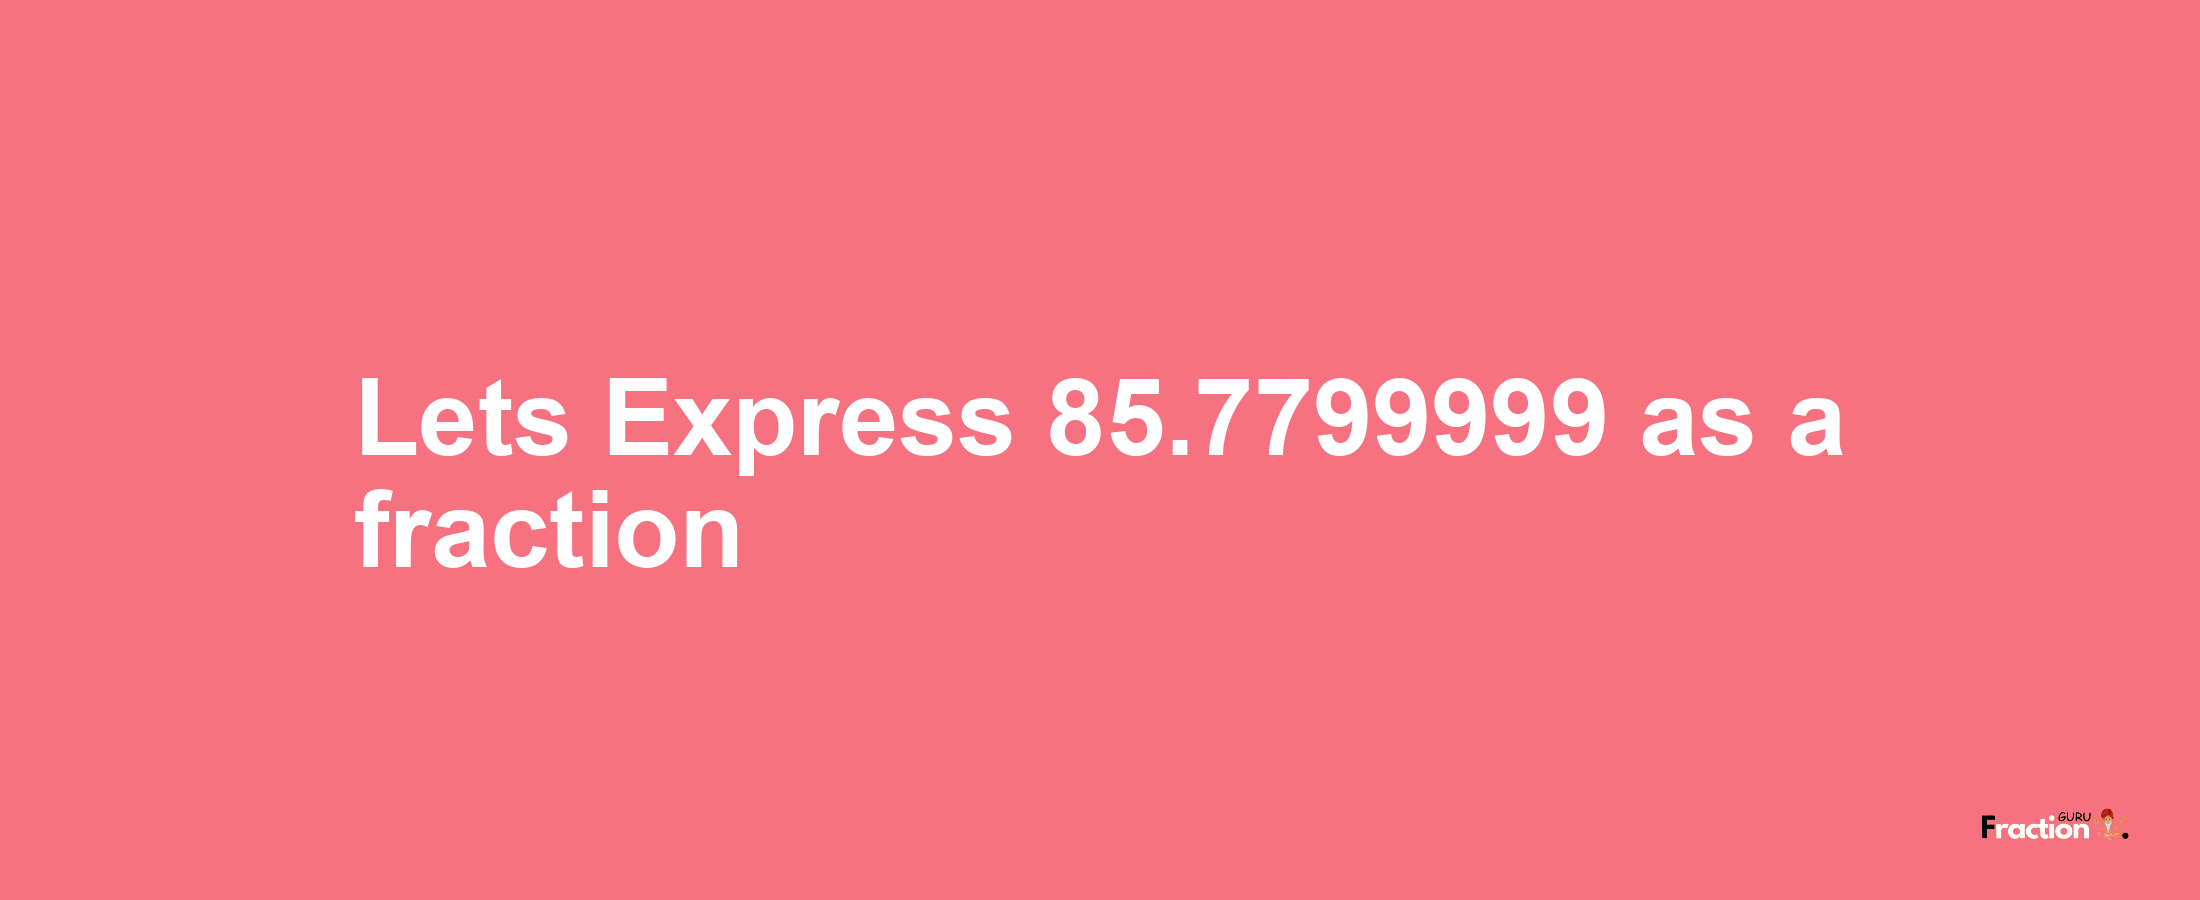 Lets Express 85.7799999 as afraction